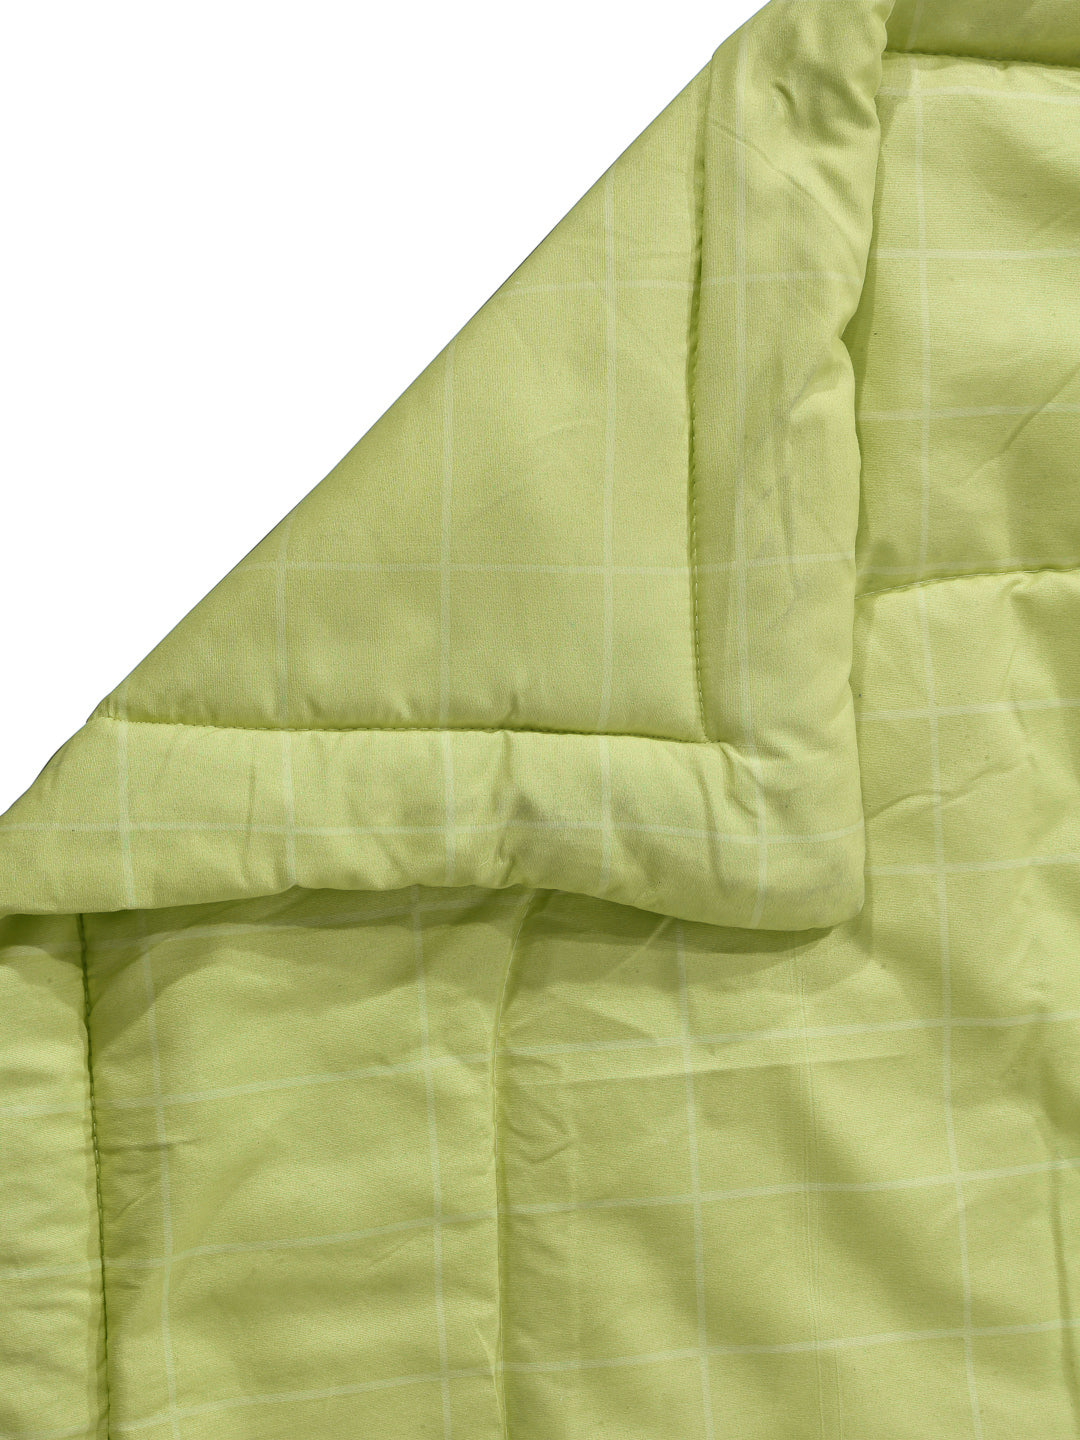 Arrabi Green Check TC Cotton Blend Double Size Comforter Bedding Set with 2 Pillow Cover